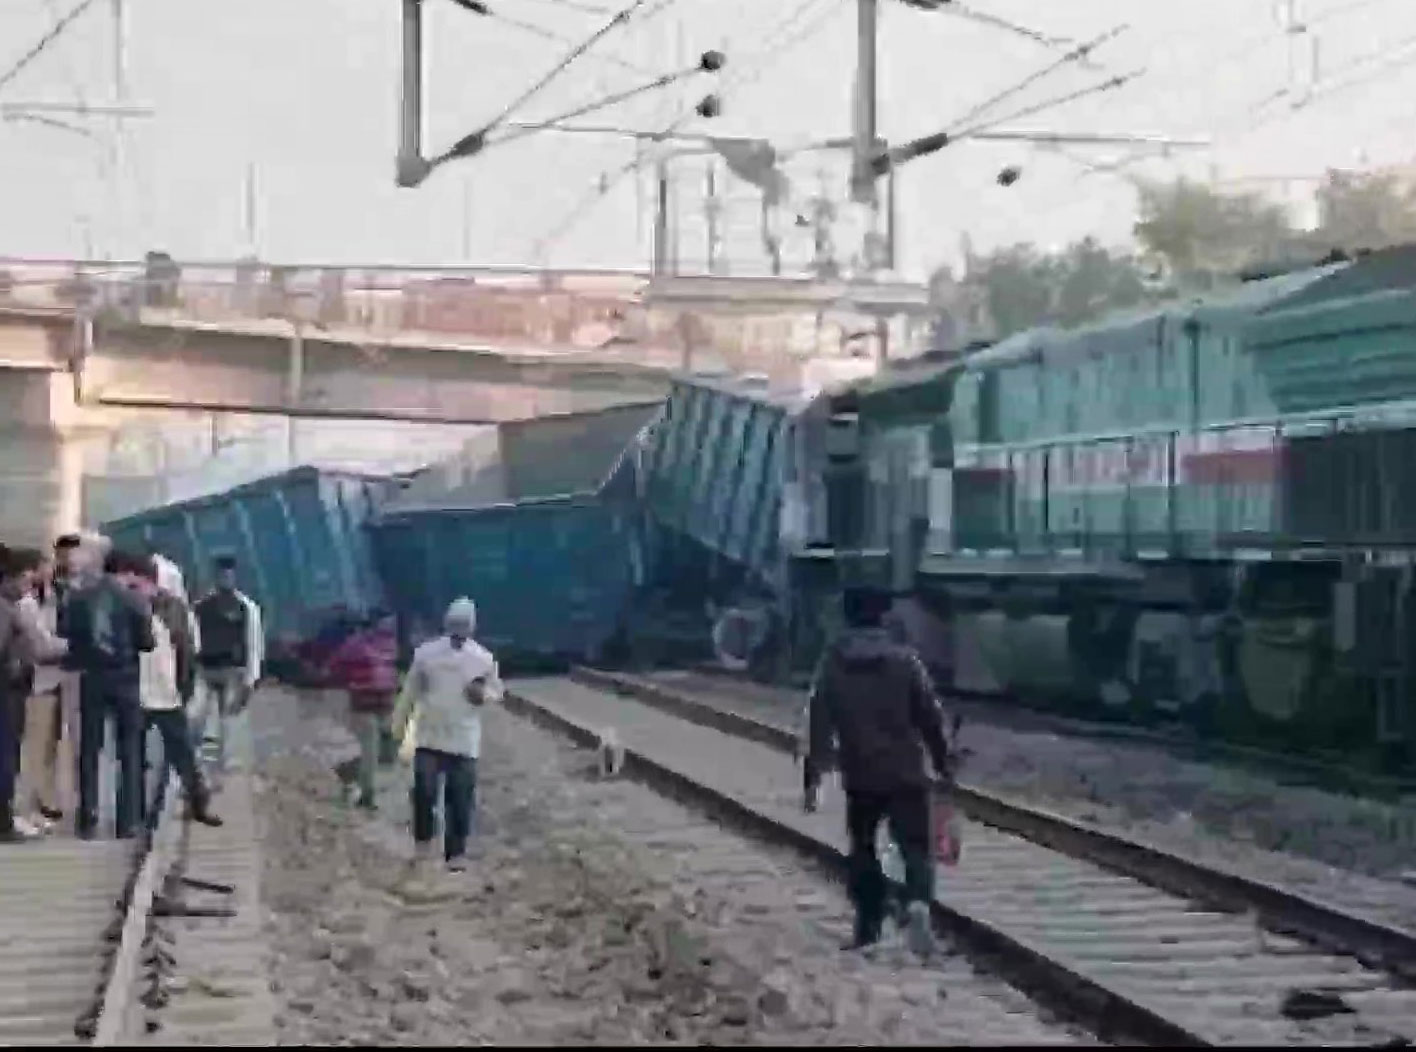 UP Goods Trains Accident